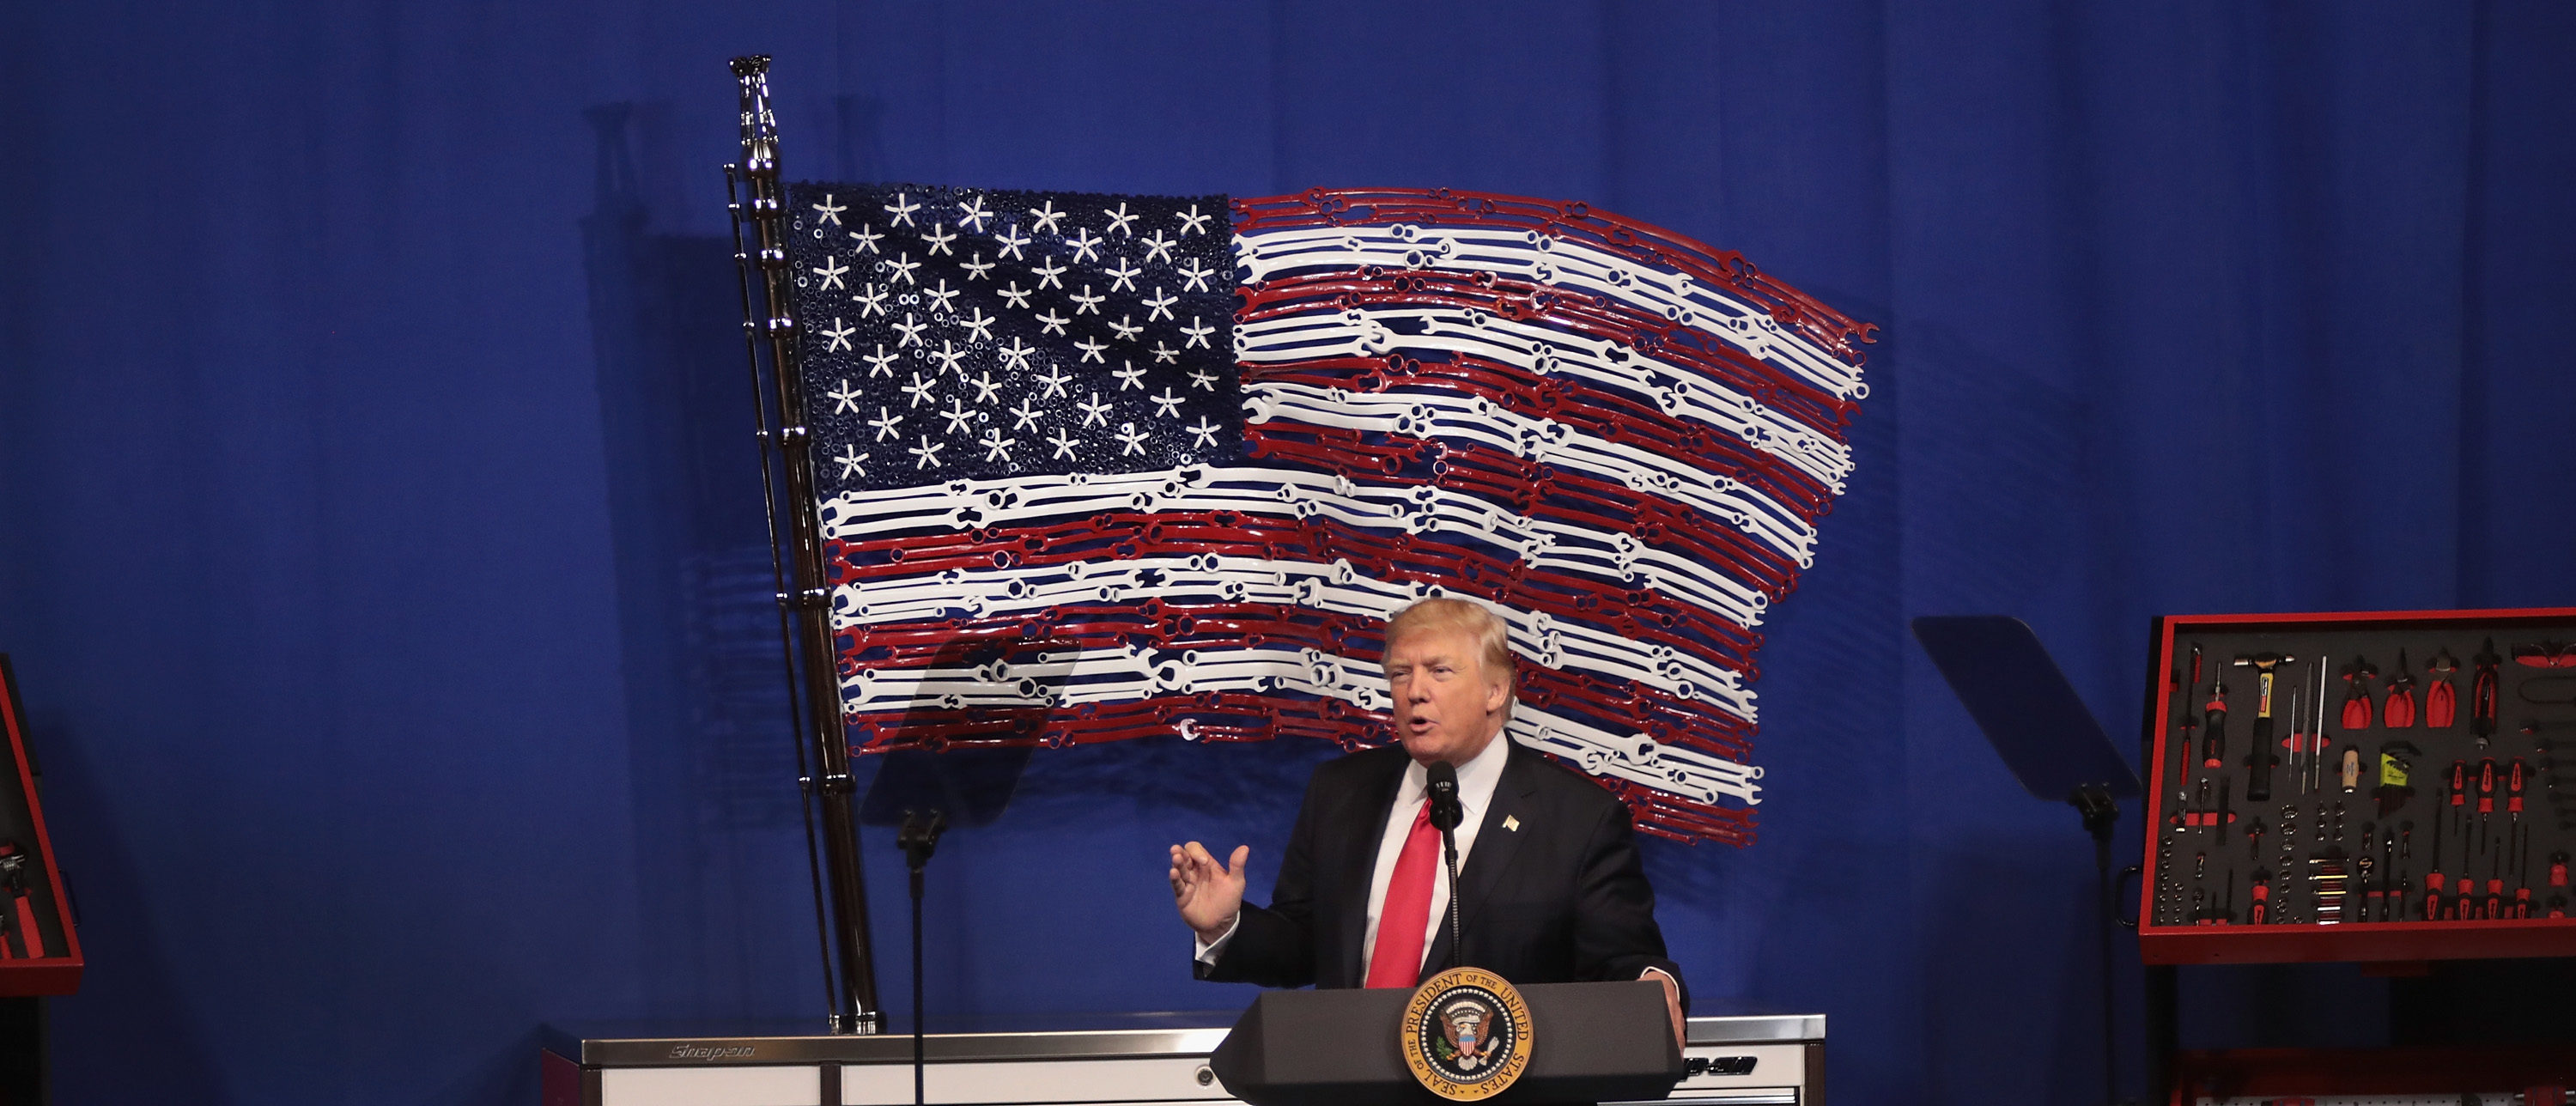 KENOSHA, WI - APRIL 18: President Donald Trump speaks to workers at the headquarters of tool manufacturer Snap-On on April 18, 2017 in Kenosha, Wisconsin. During the visit, Trump signed an executive order to try to bring jobs back to American workers and revamp the H-1B visa guest worker program. (Photo by Scott Olson/Getty Images)